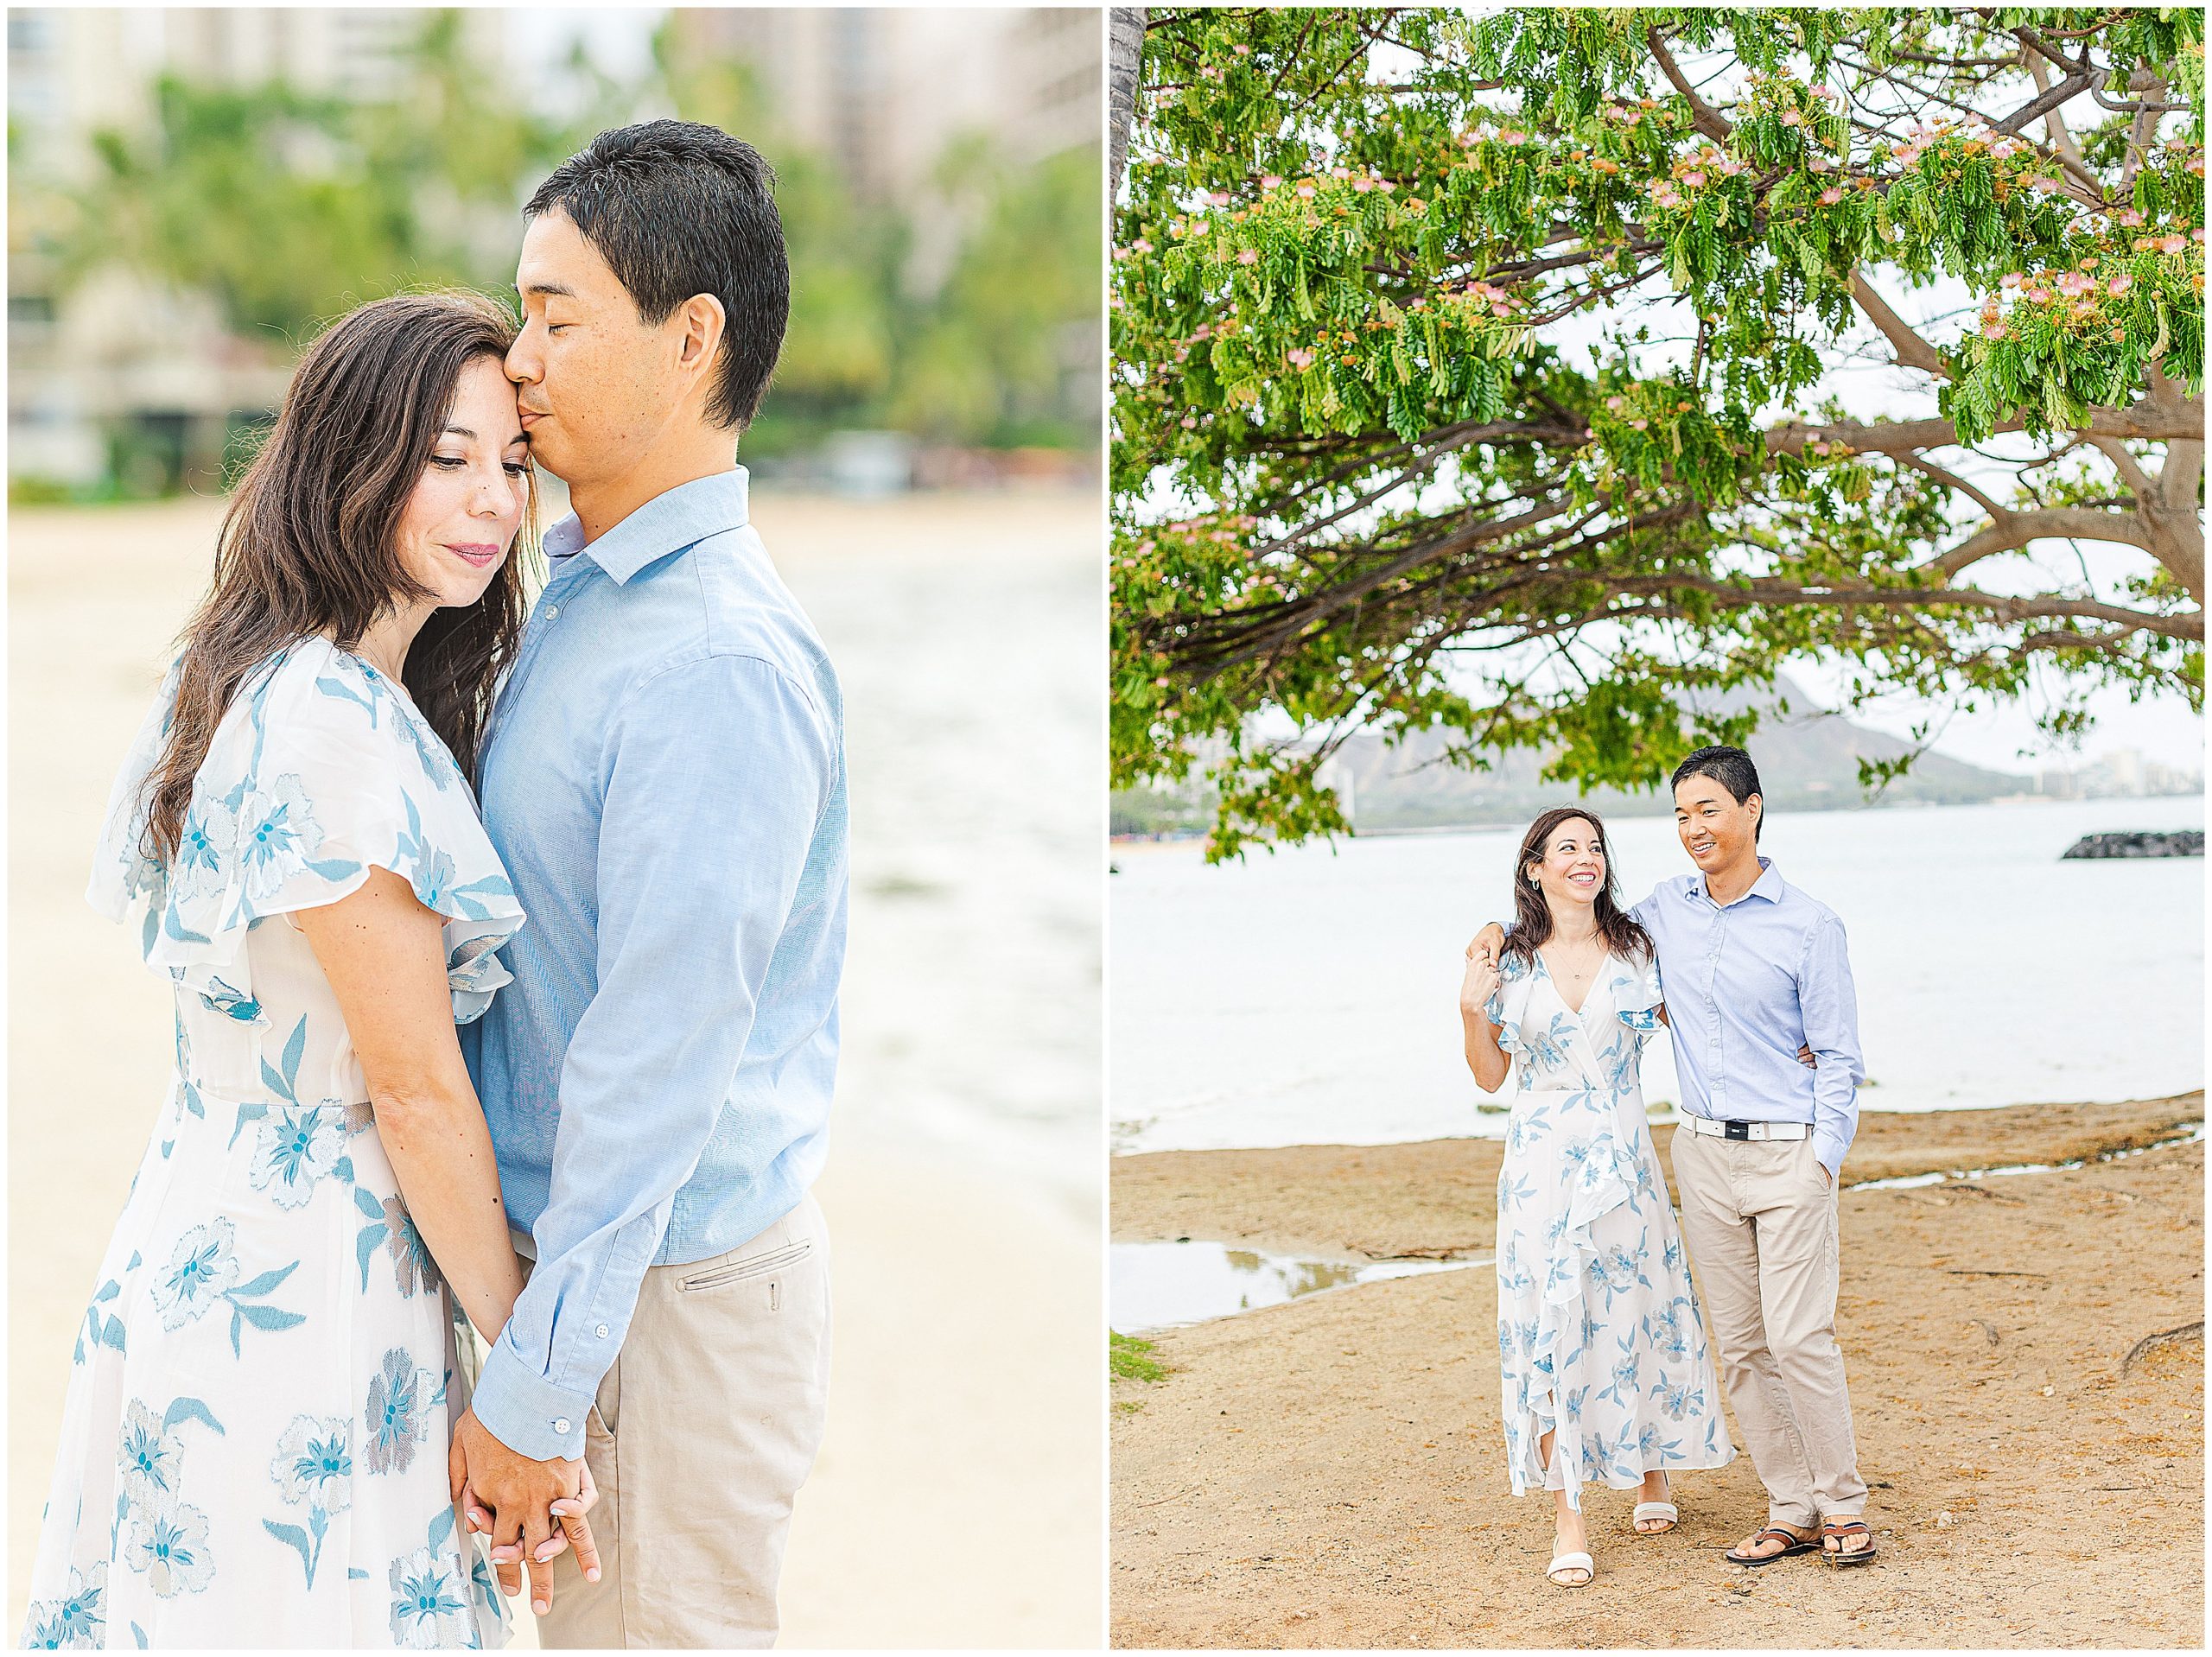 engagement photos at the beach. one image shows the groom kissing her head and the other is the two of them laughing and walking under a tree.